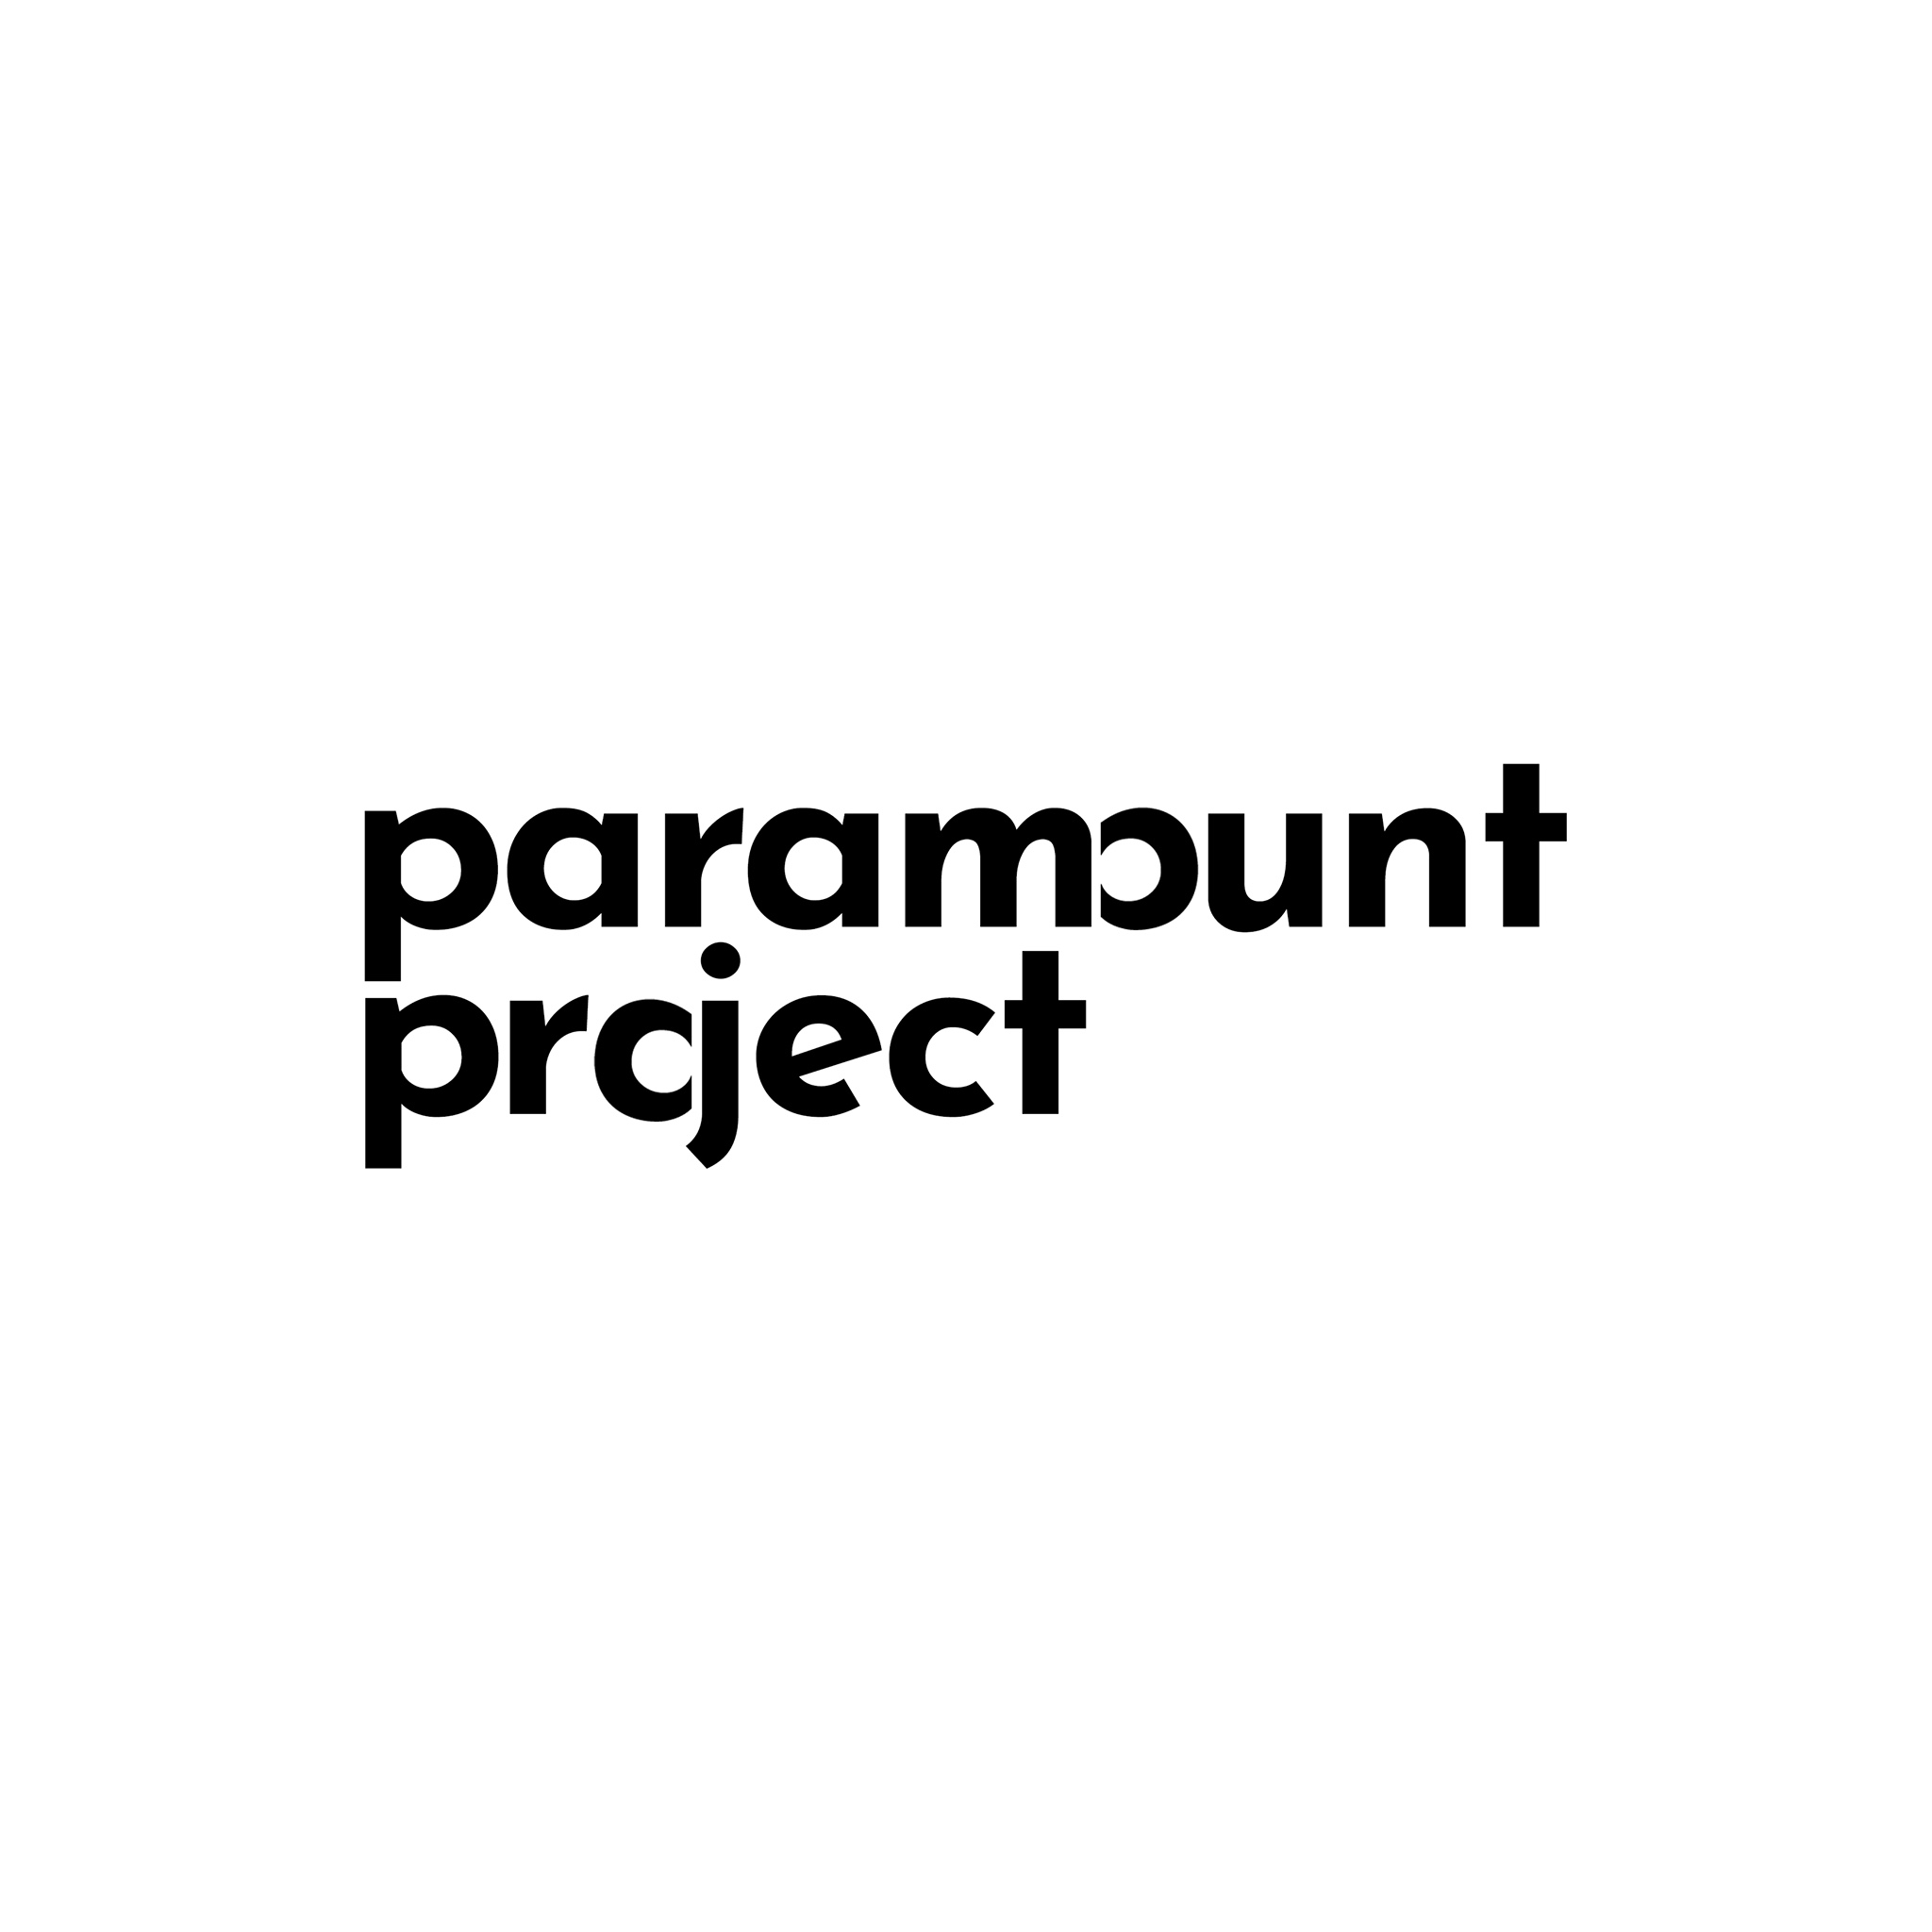 Paramount Project